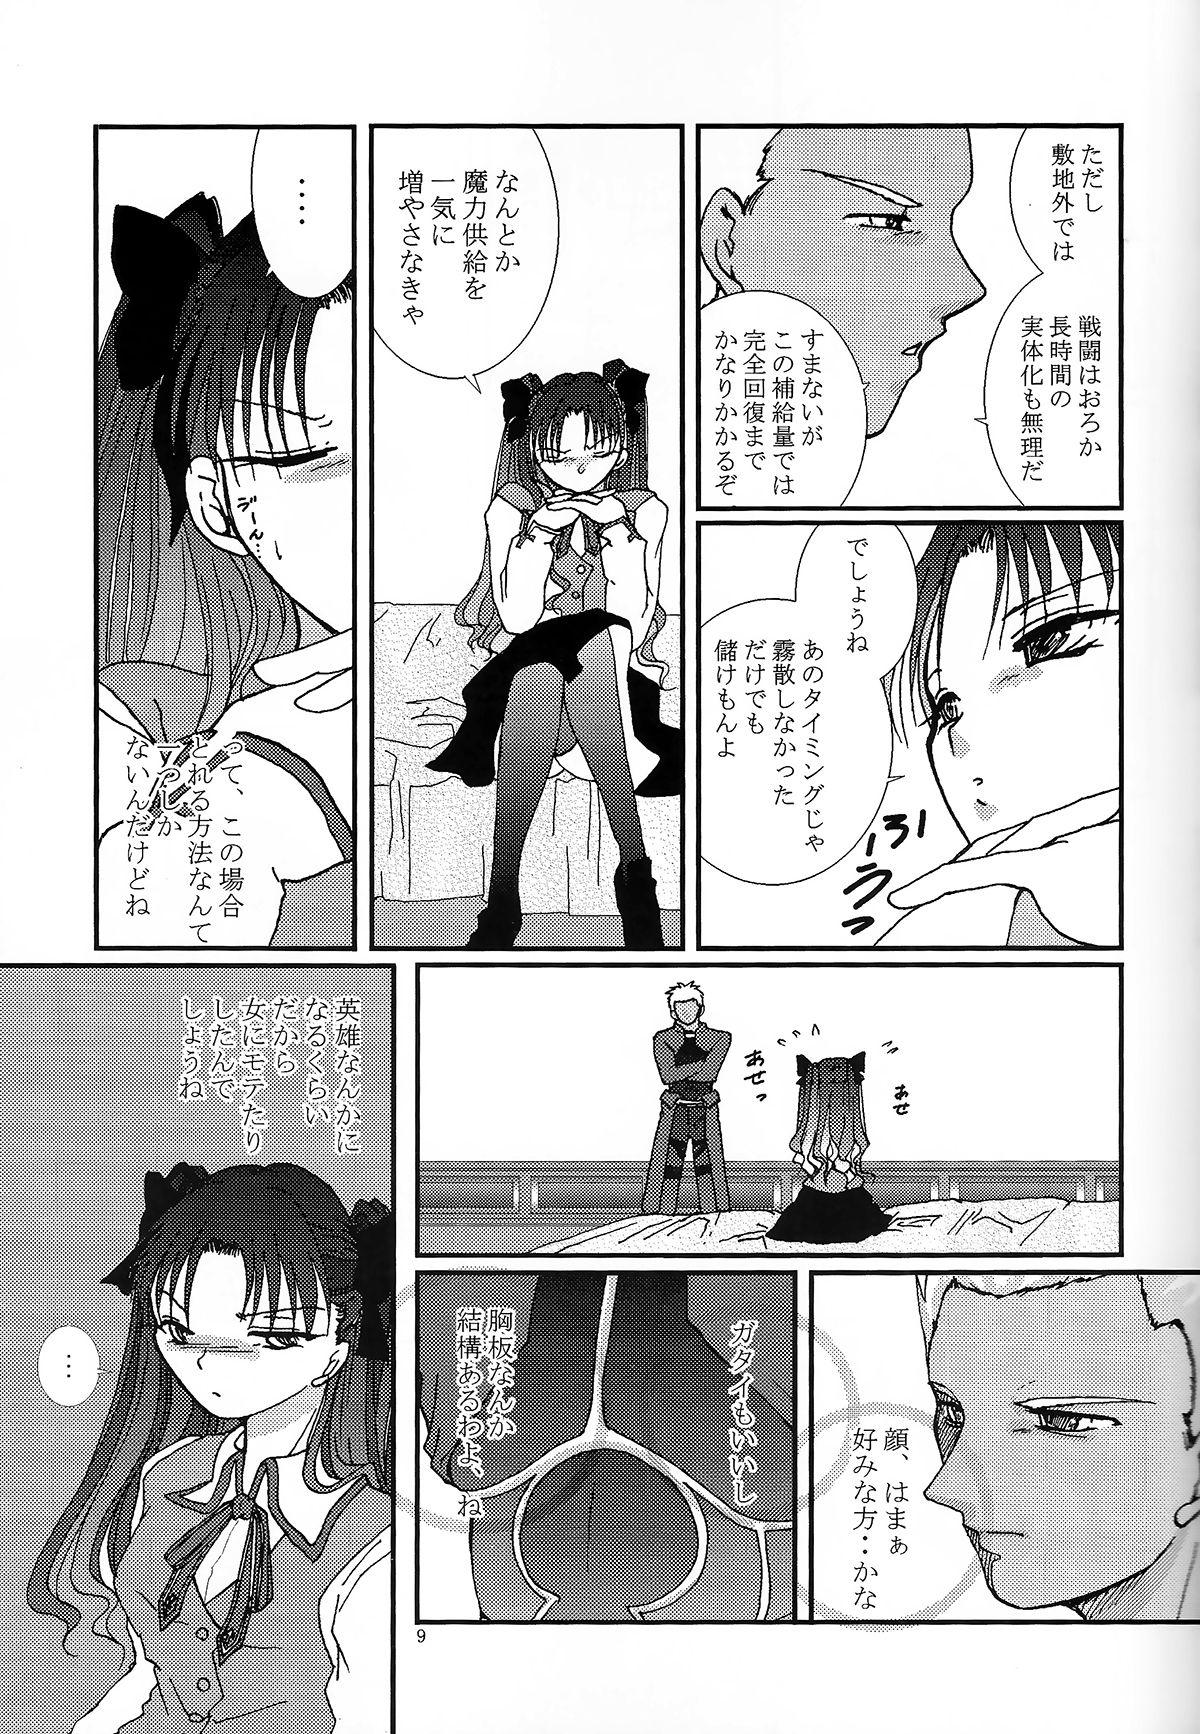 Amateurporn Question-7 - Fate stay night Blow Job Movies - Page 7